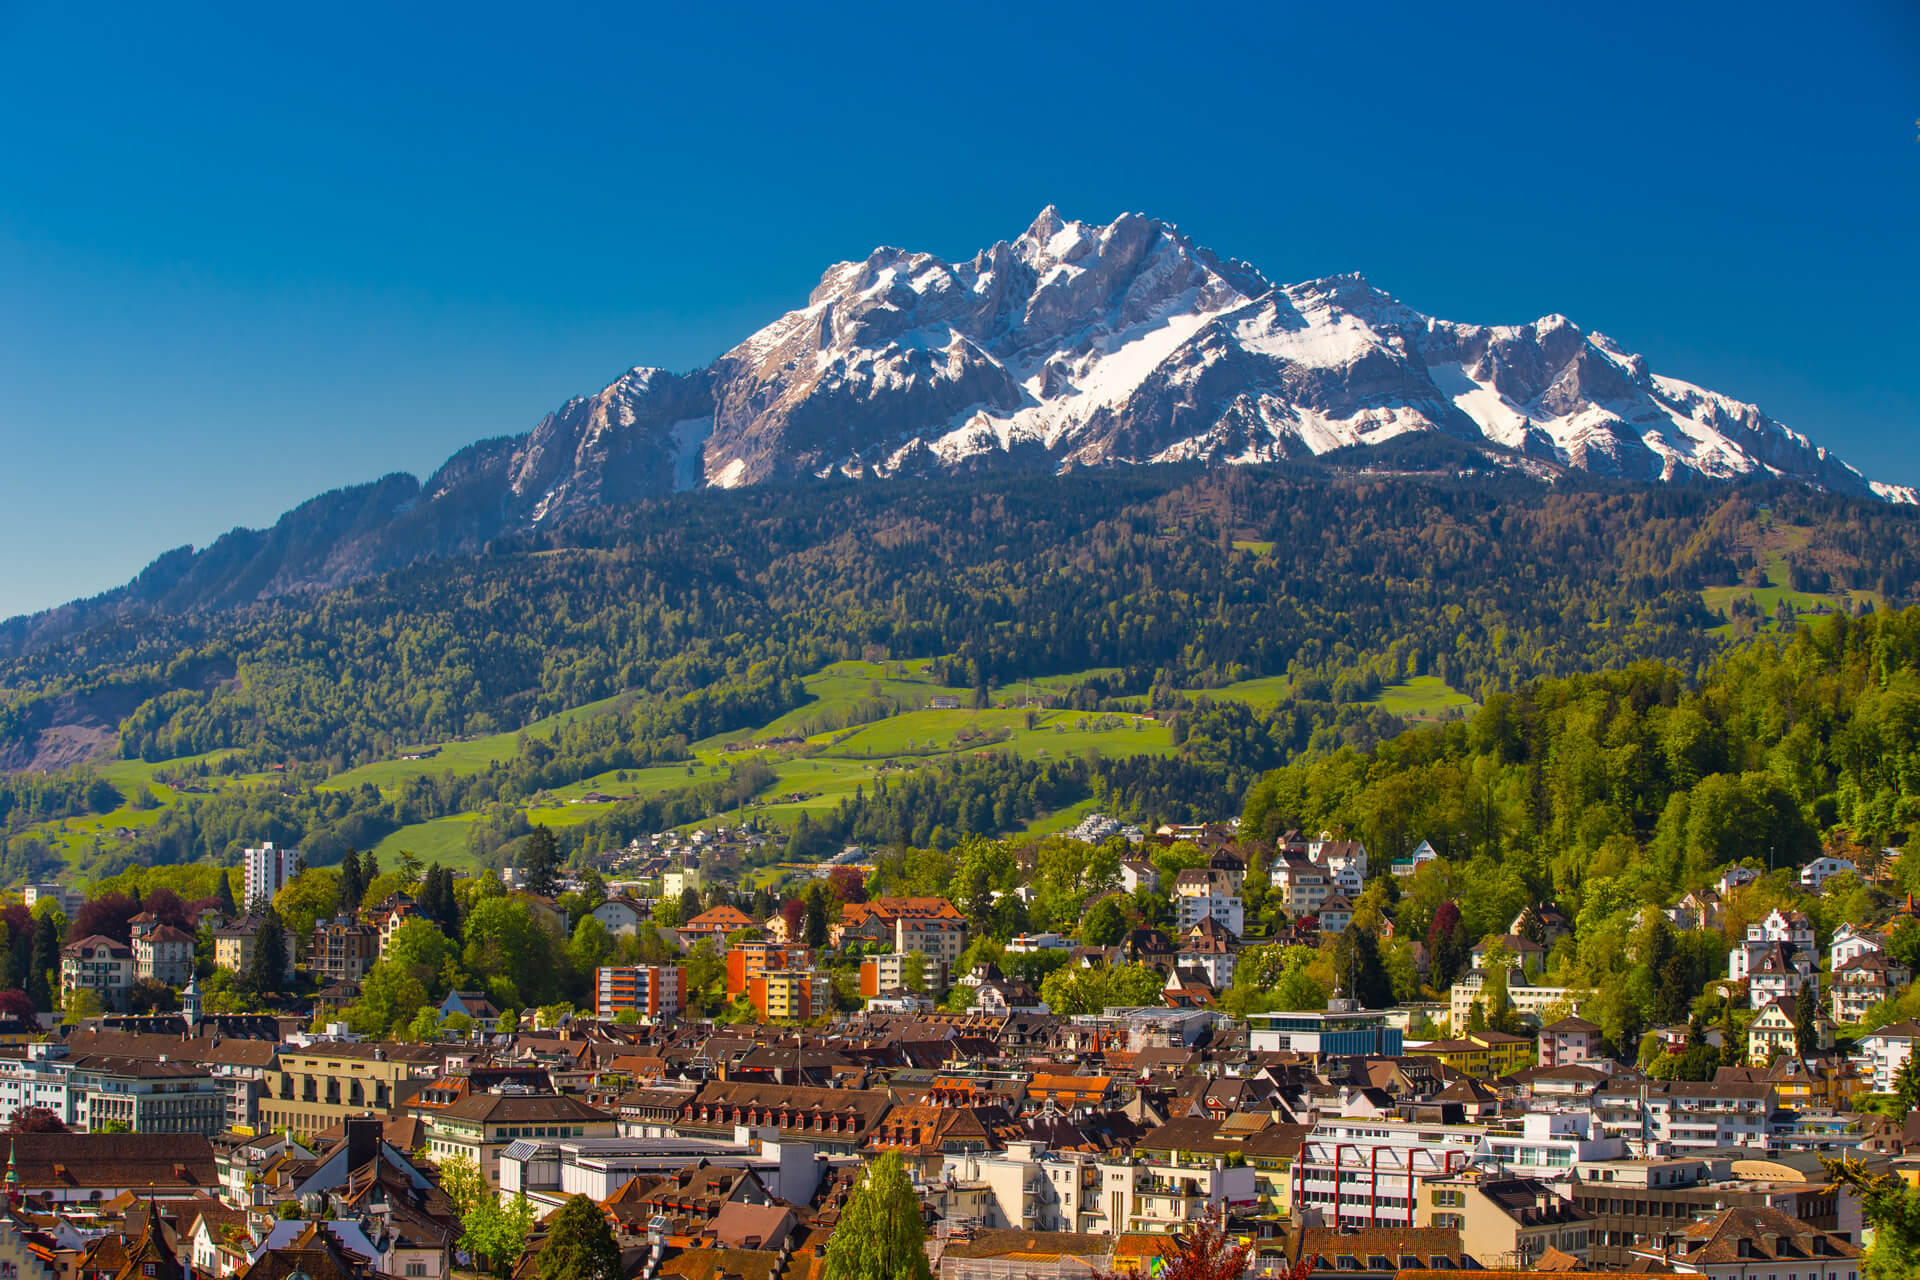 Pilatus Mountain and historic city center of Lucerne